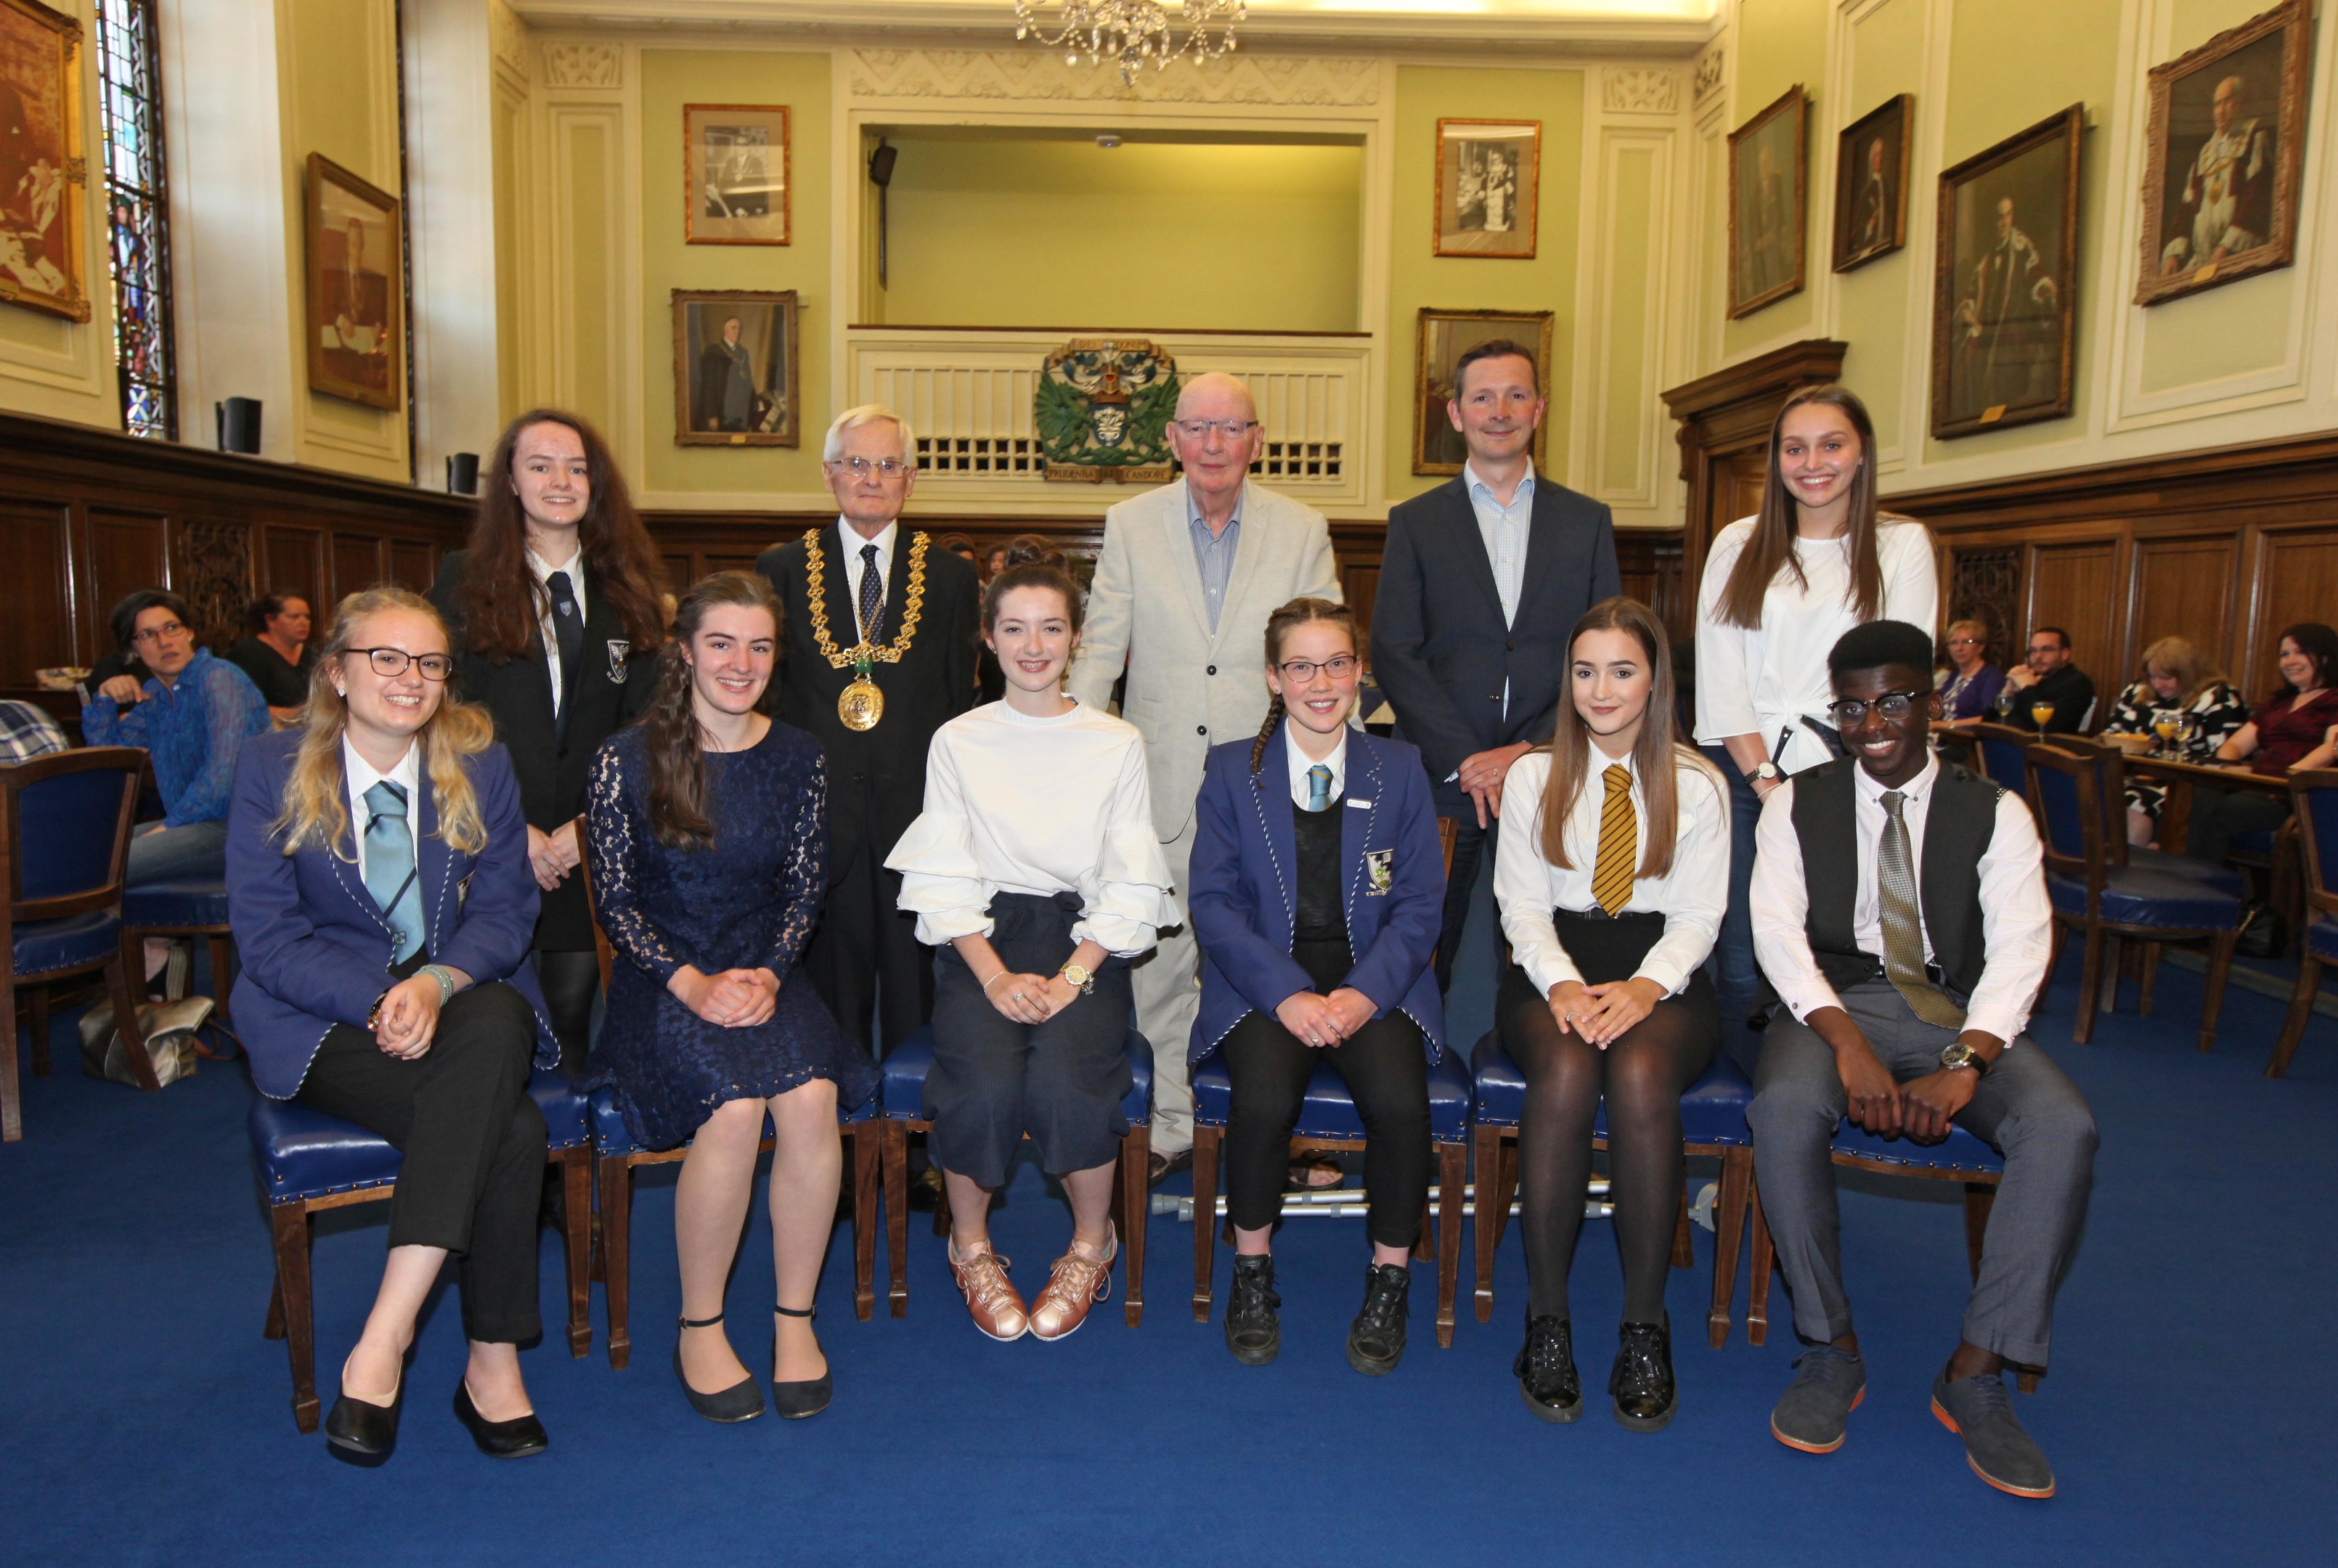 Prizewinners at Tuesday night's ceremony.